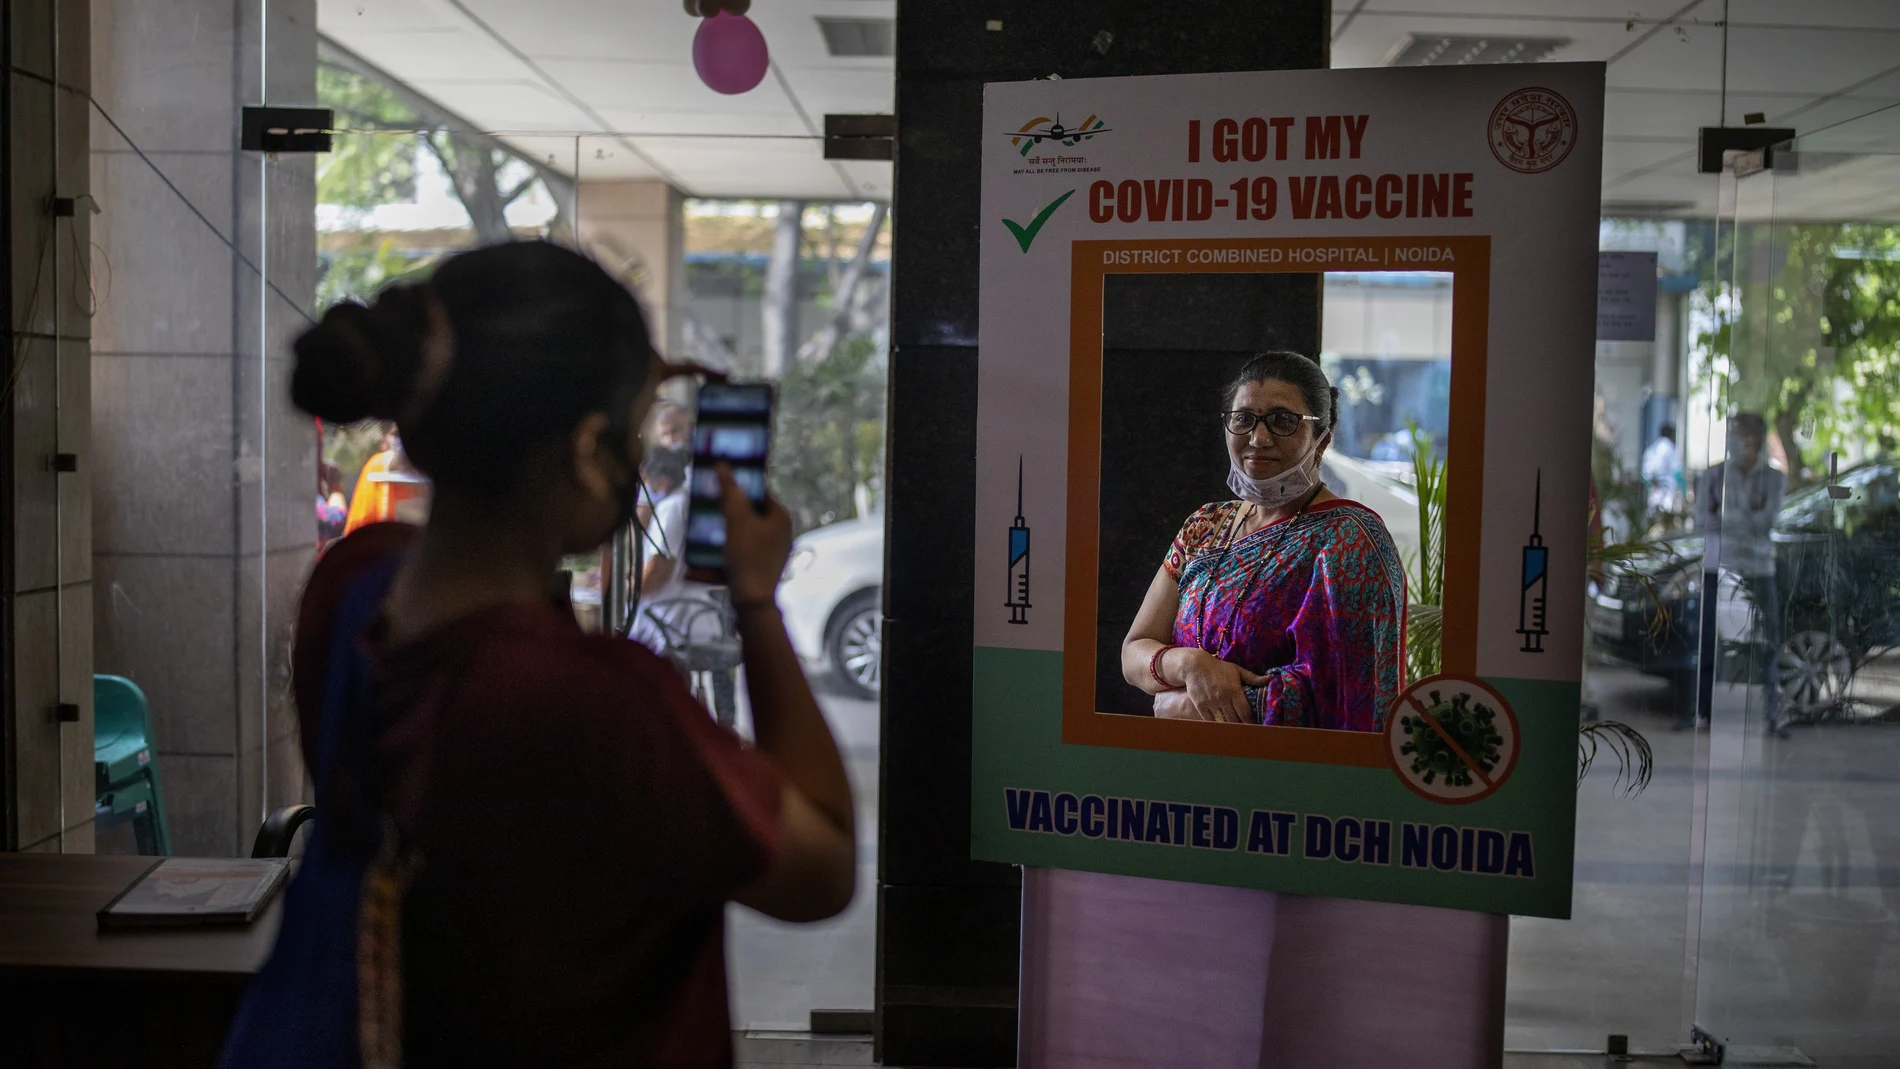 A woman poses for a photograph behind a cutout after receiving a COVID- 19 vaccine at a government hospital in Noida, a suburb of New Delhi, India, Wednesday, April 7, 2021. India hits another new peak with 115,736 coronavirus cases reported in the past 24 hours with New Delhi, Mumbai and dozens of other cities imposing night curfews to check the soaring infections. (AP Photo/Altaf Qadri)